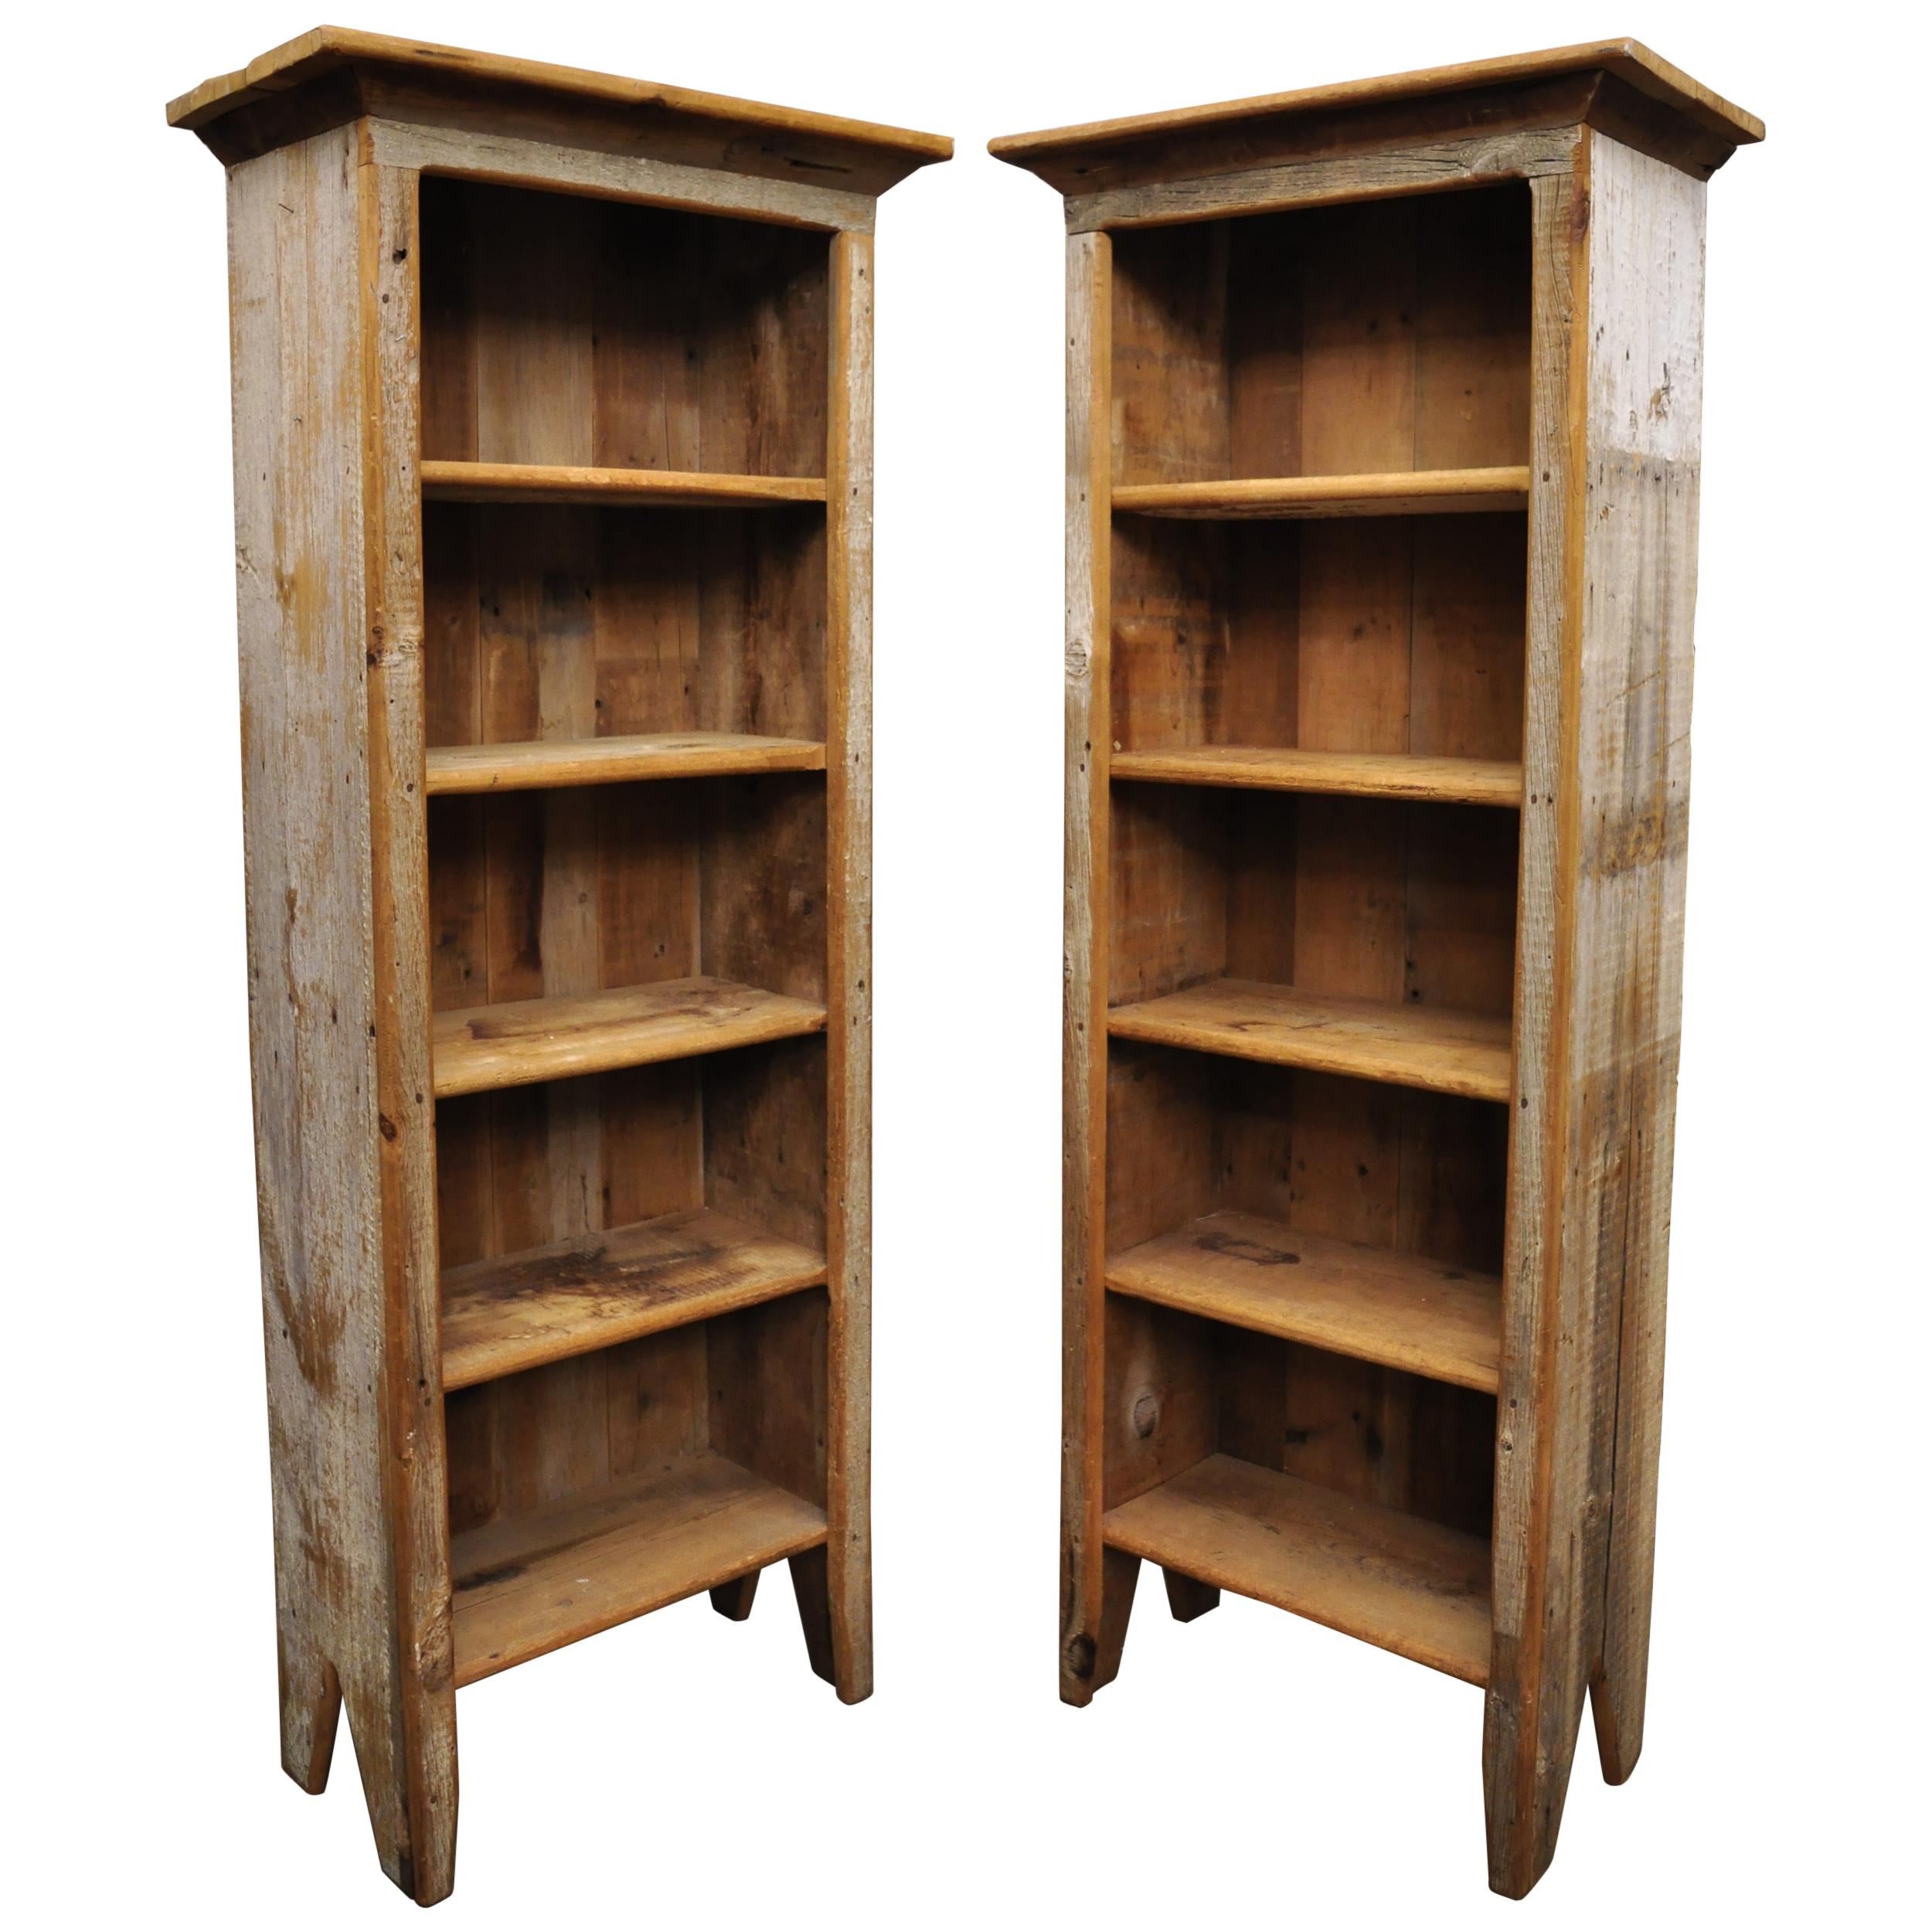 Vintage Pine Wooden Distress Painted Tall Narrow Kitchen Cupboard Bookcase